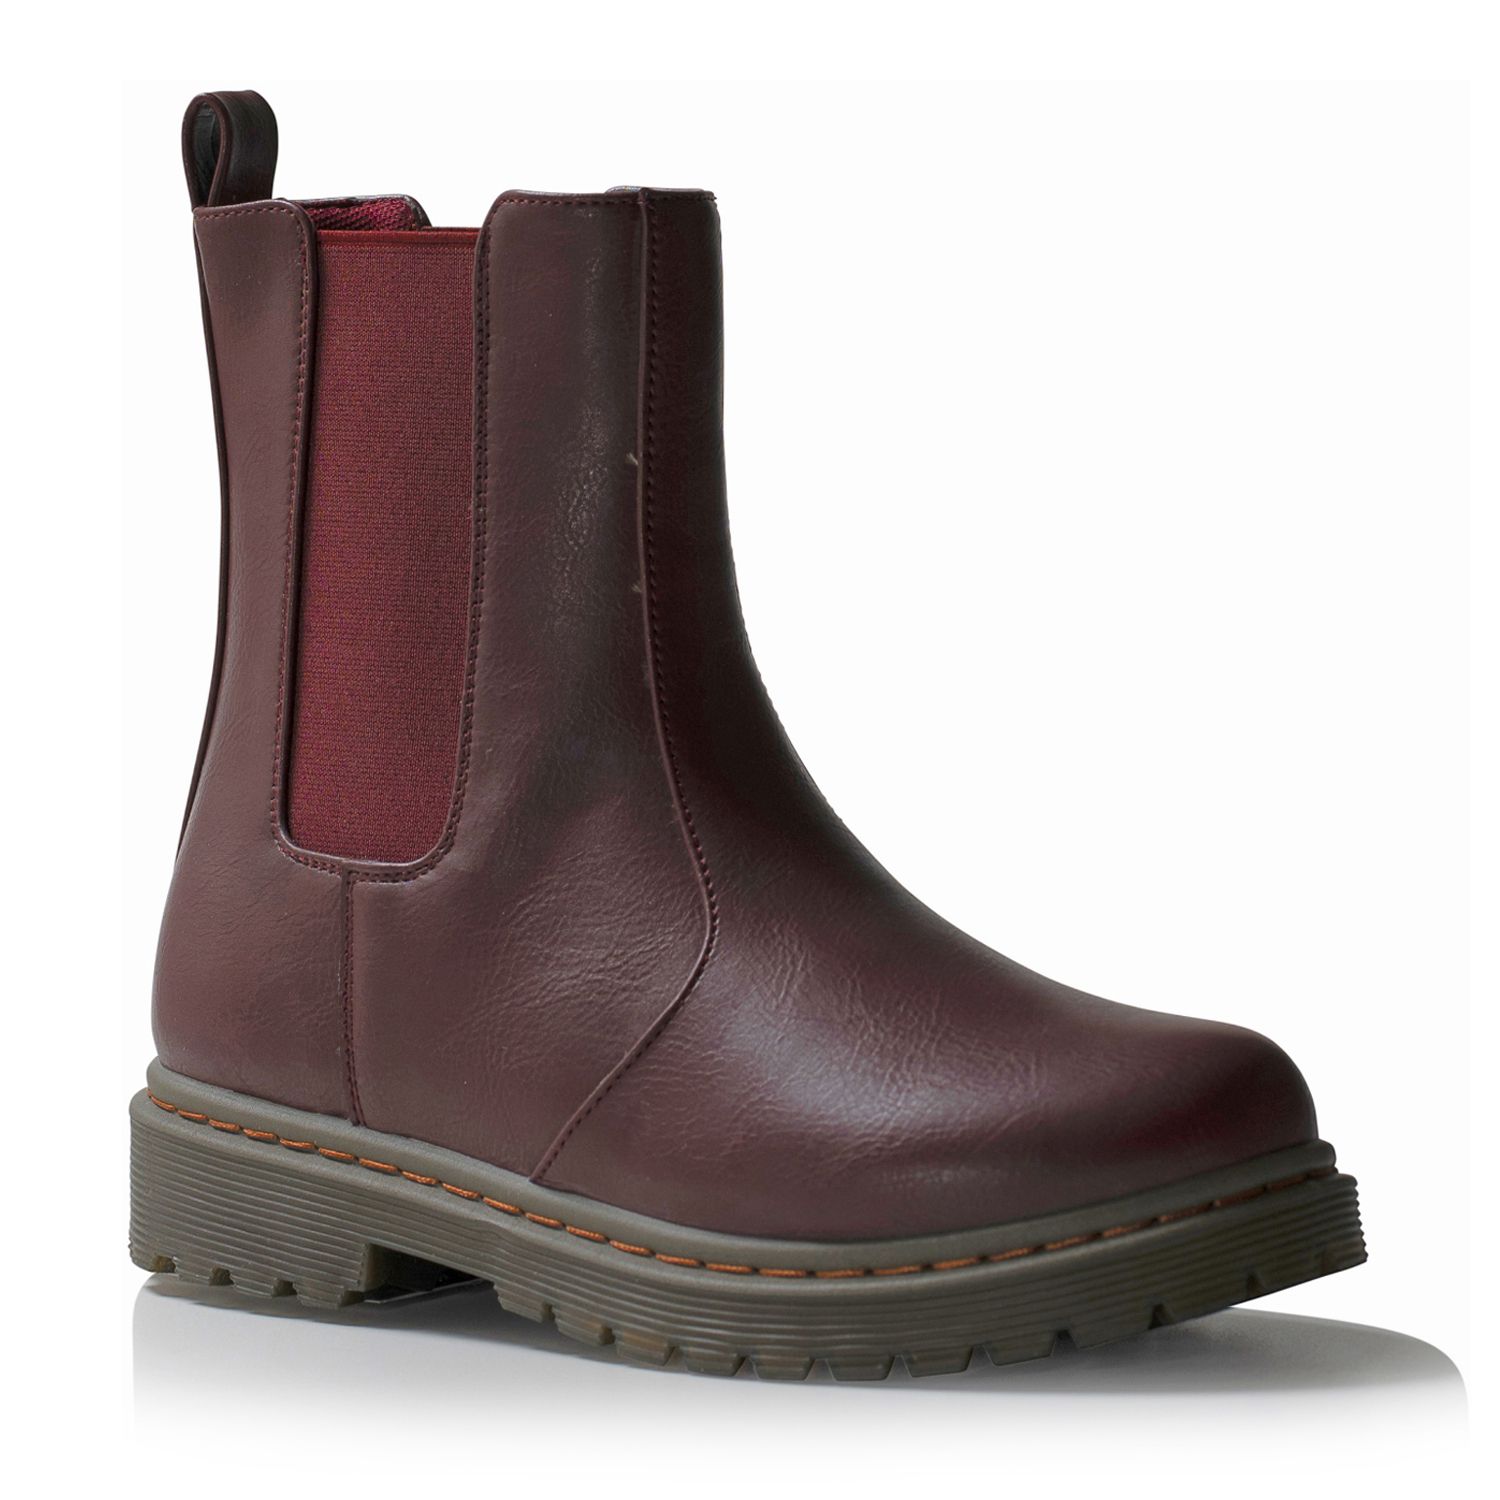 Image for Henry Ferrera Classic Women's Chelsea Boots at Kohl's.